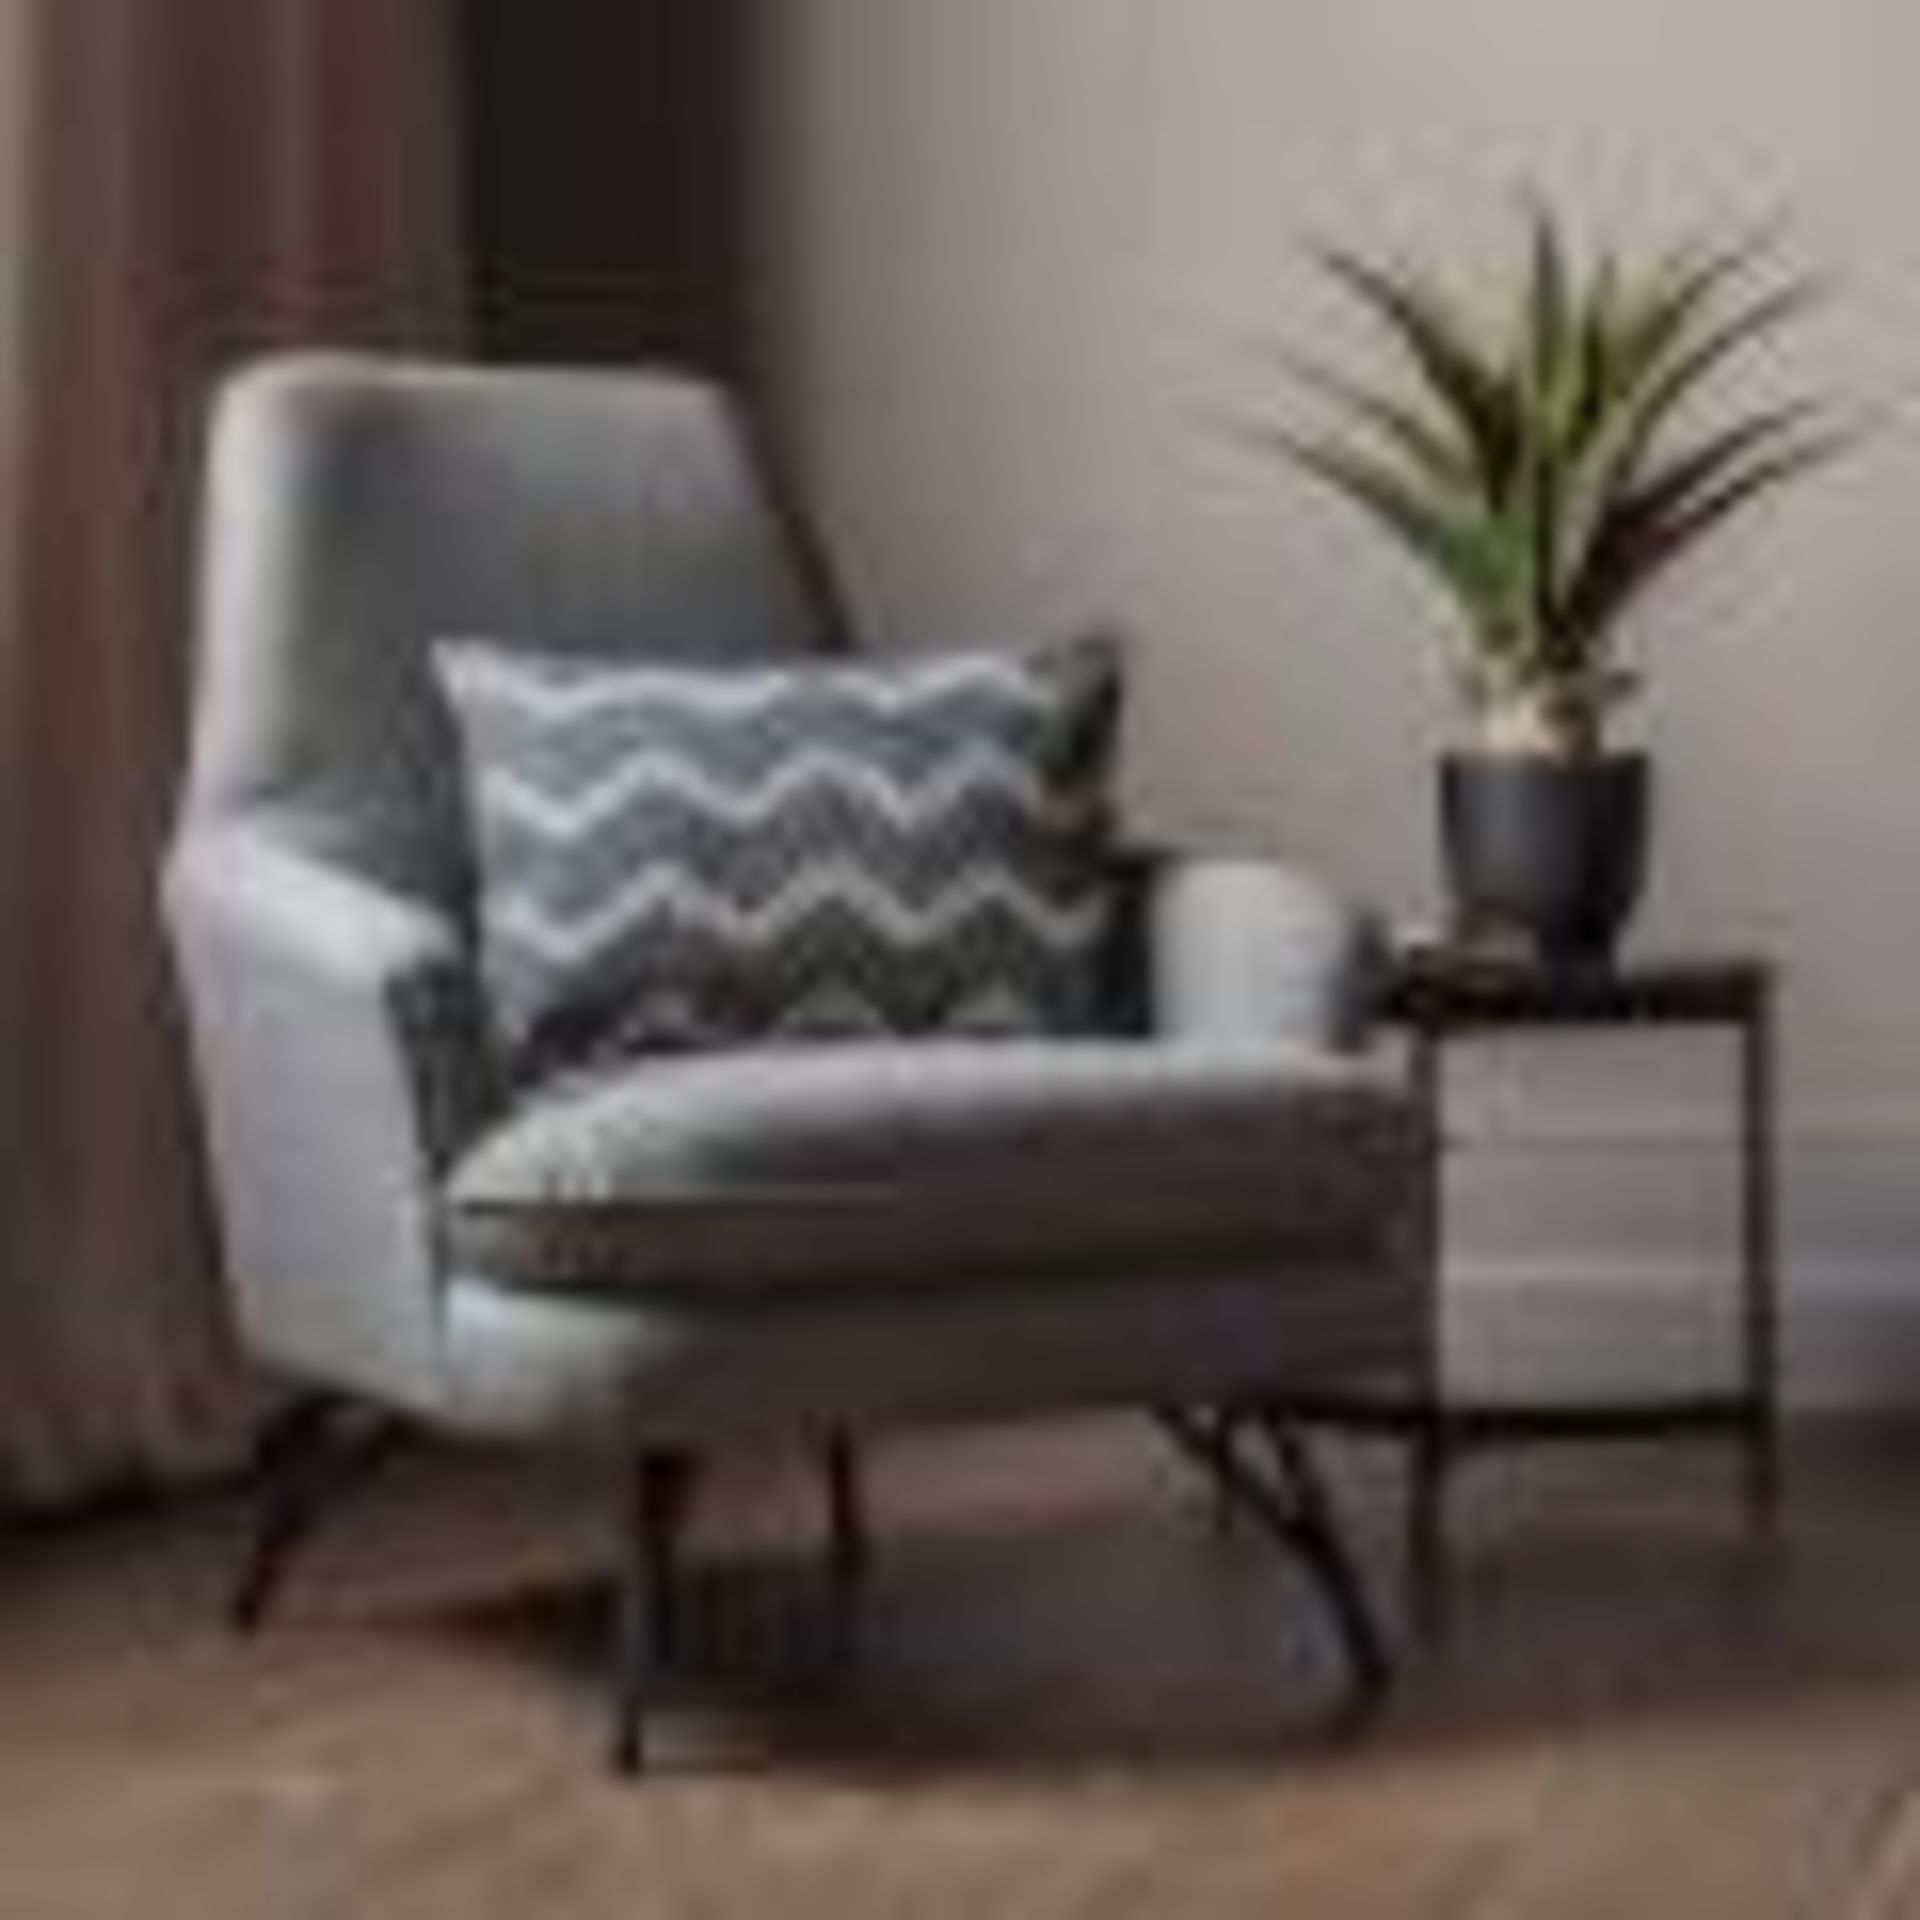 Radlett Chair Modena Nickel The Radlett is a sophisticated large armchair, offering maximum